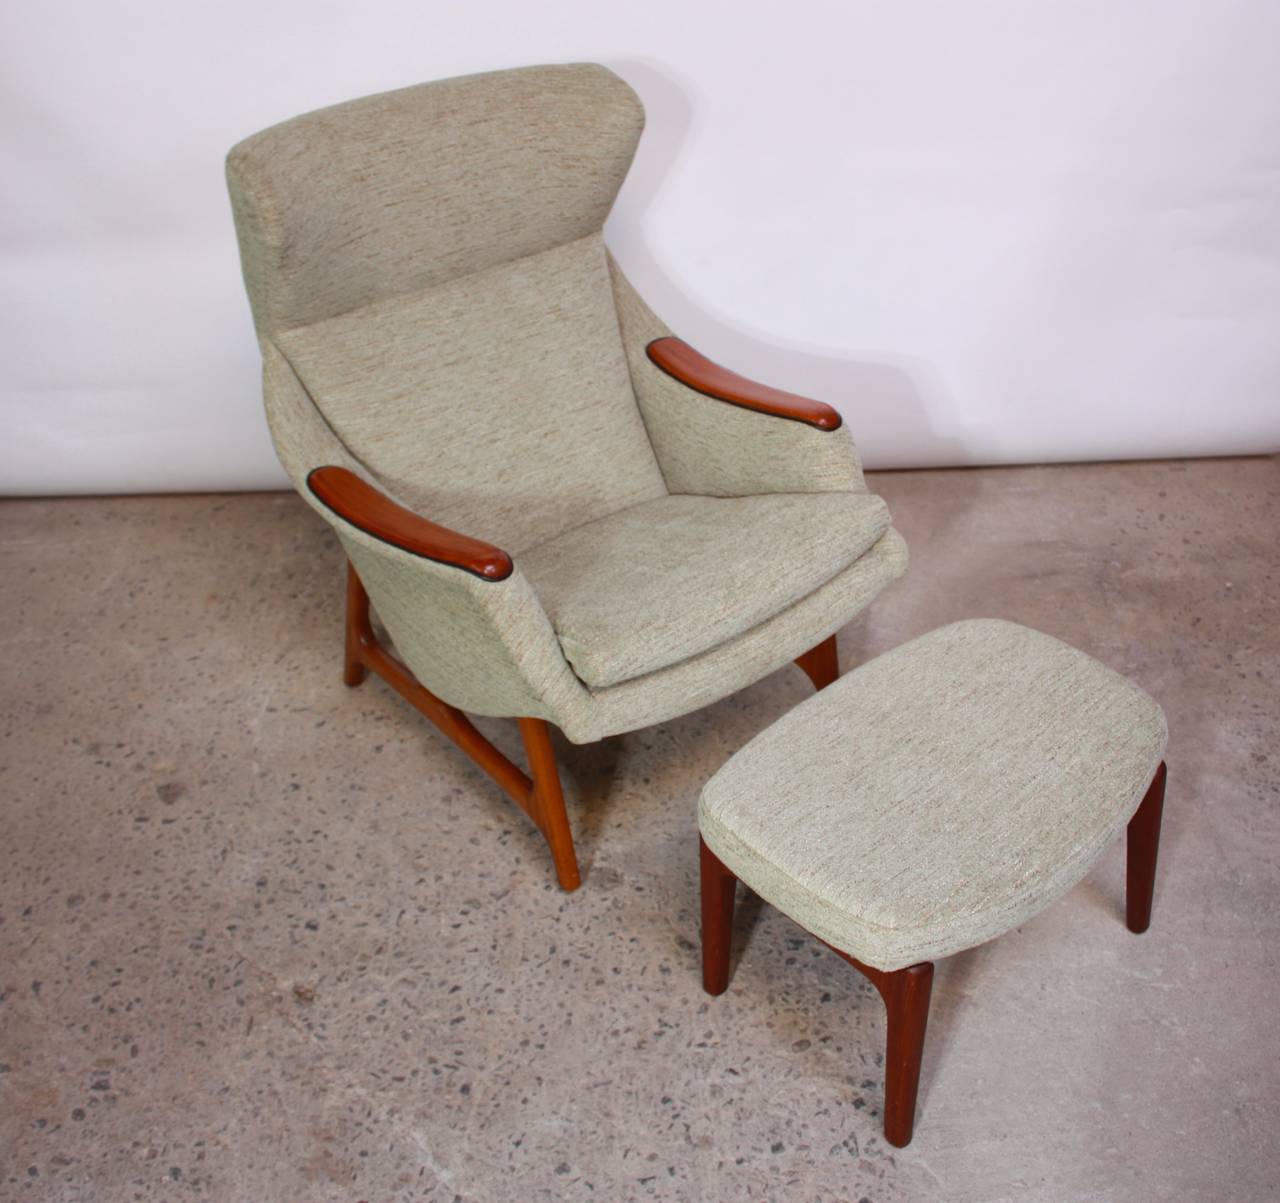 This sculptural lounge chair by B.J. Hansen of Norway has been newly upholstered in a mint chenille with leather detailing around the armrests. Both ottoman and chair are designed by B.J. Hansen of Norway, however the chair is constructed of solid